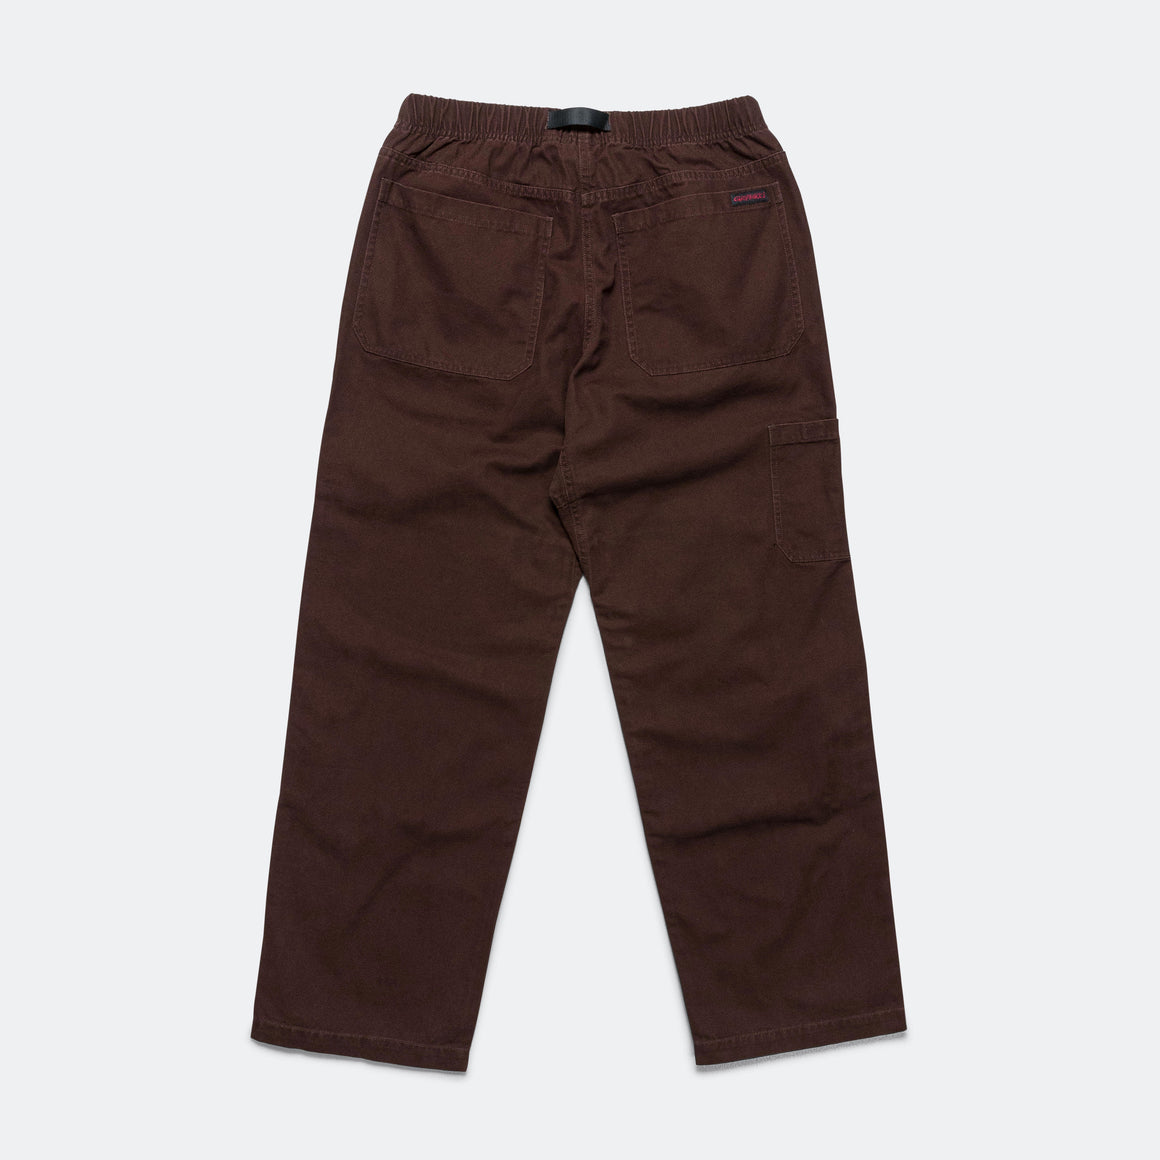 Gramicci - Canvas Double Knee Pant - Dark Brown - UP THERE